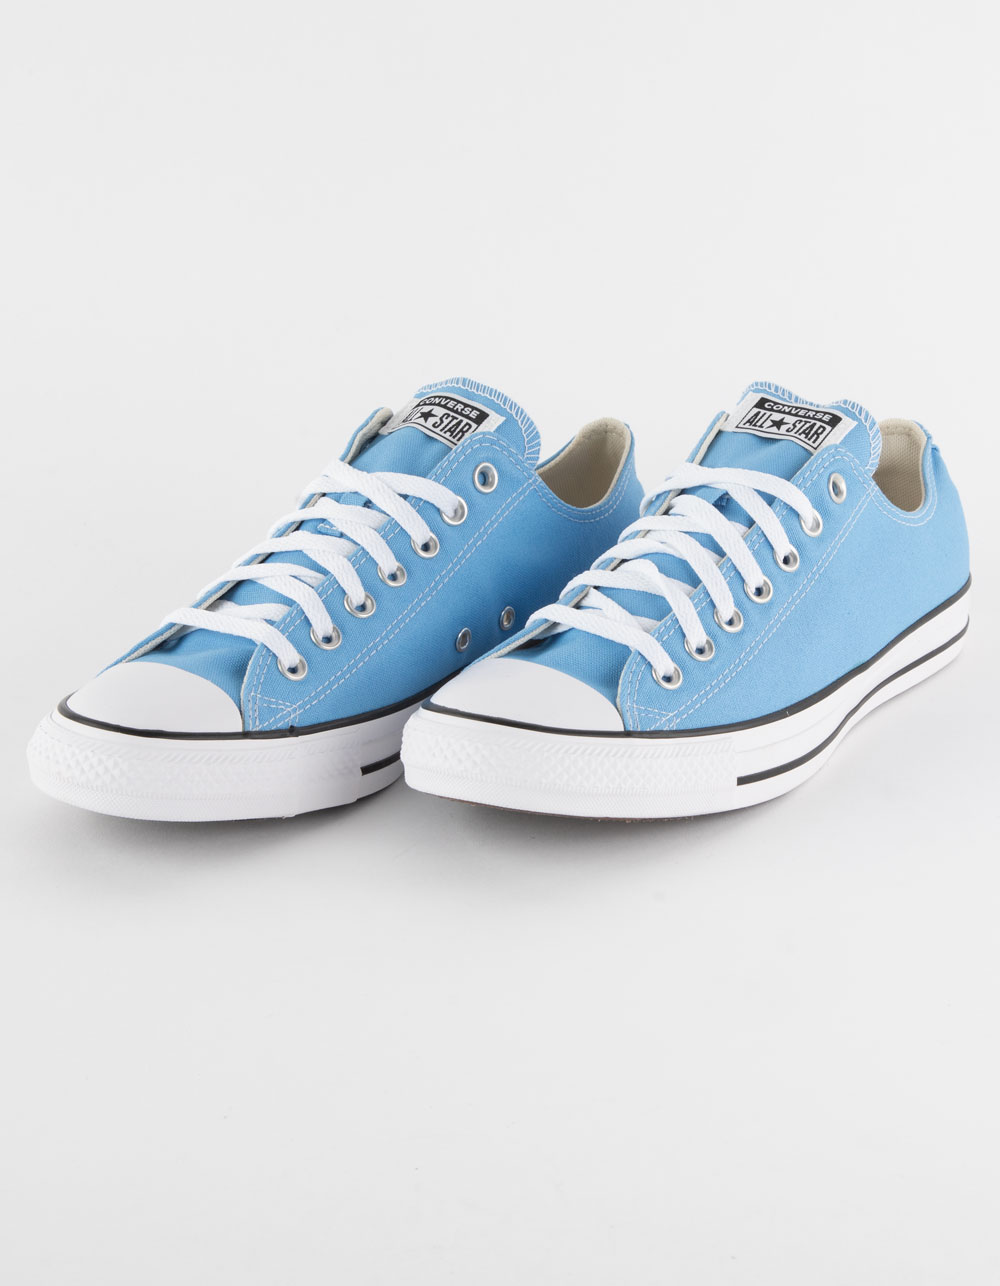 CONVERSE Chuck Taylor All Star Low Top shoes